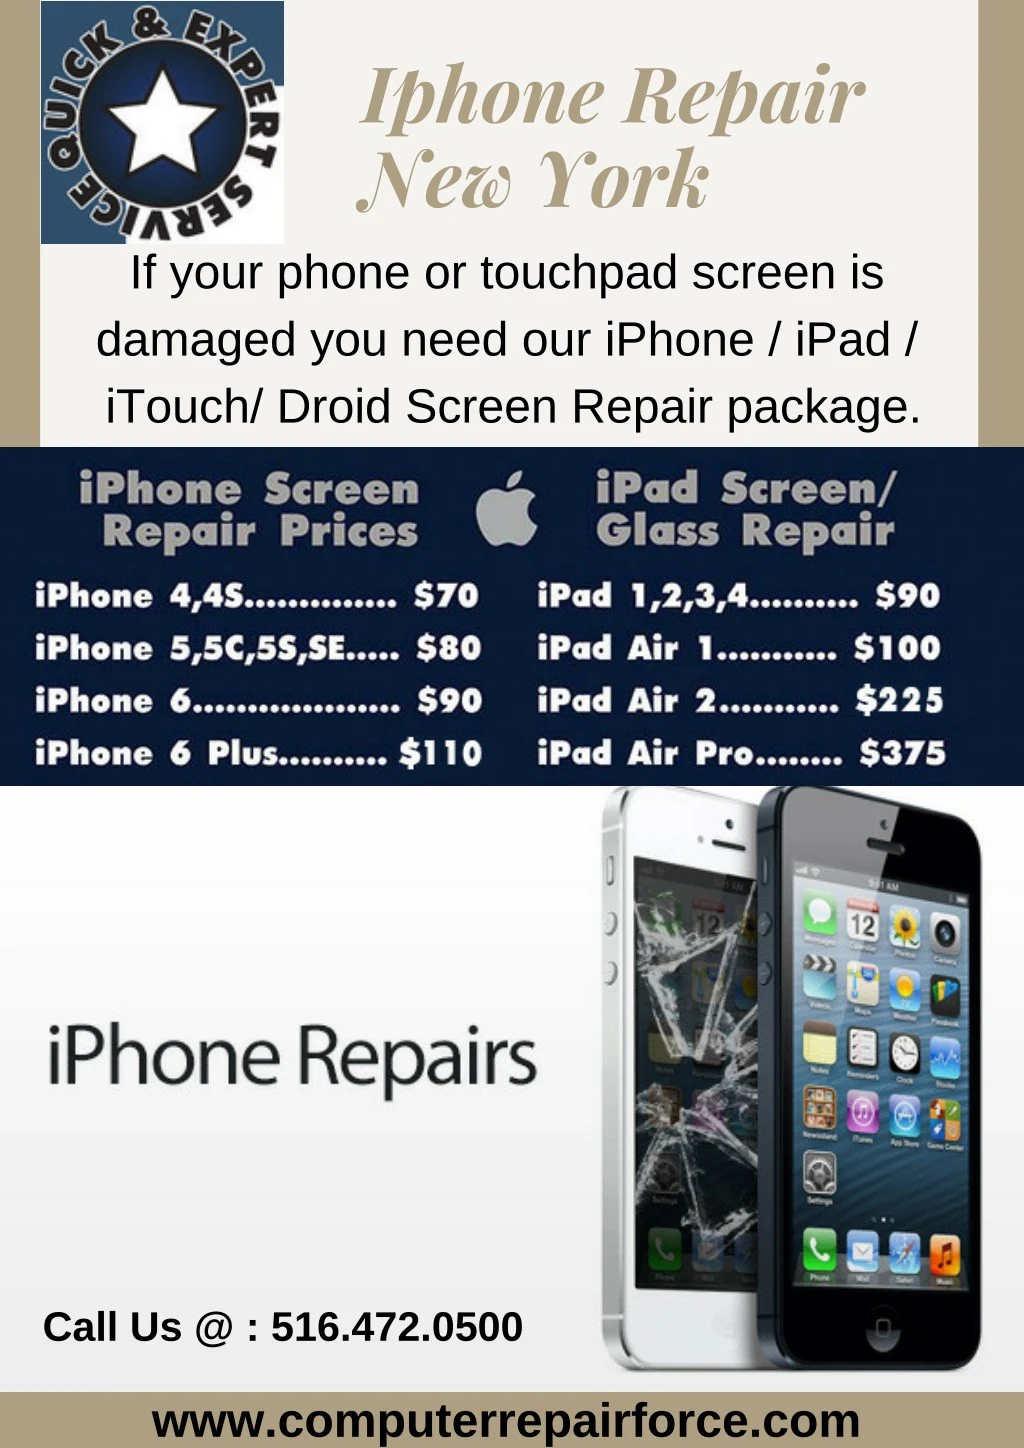 iphone repair new york if your phone or touchpad